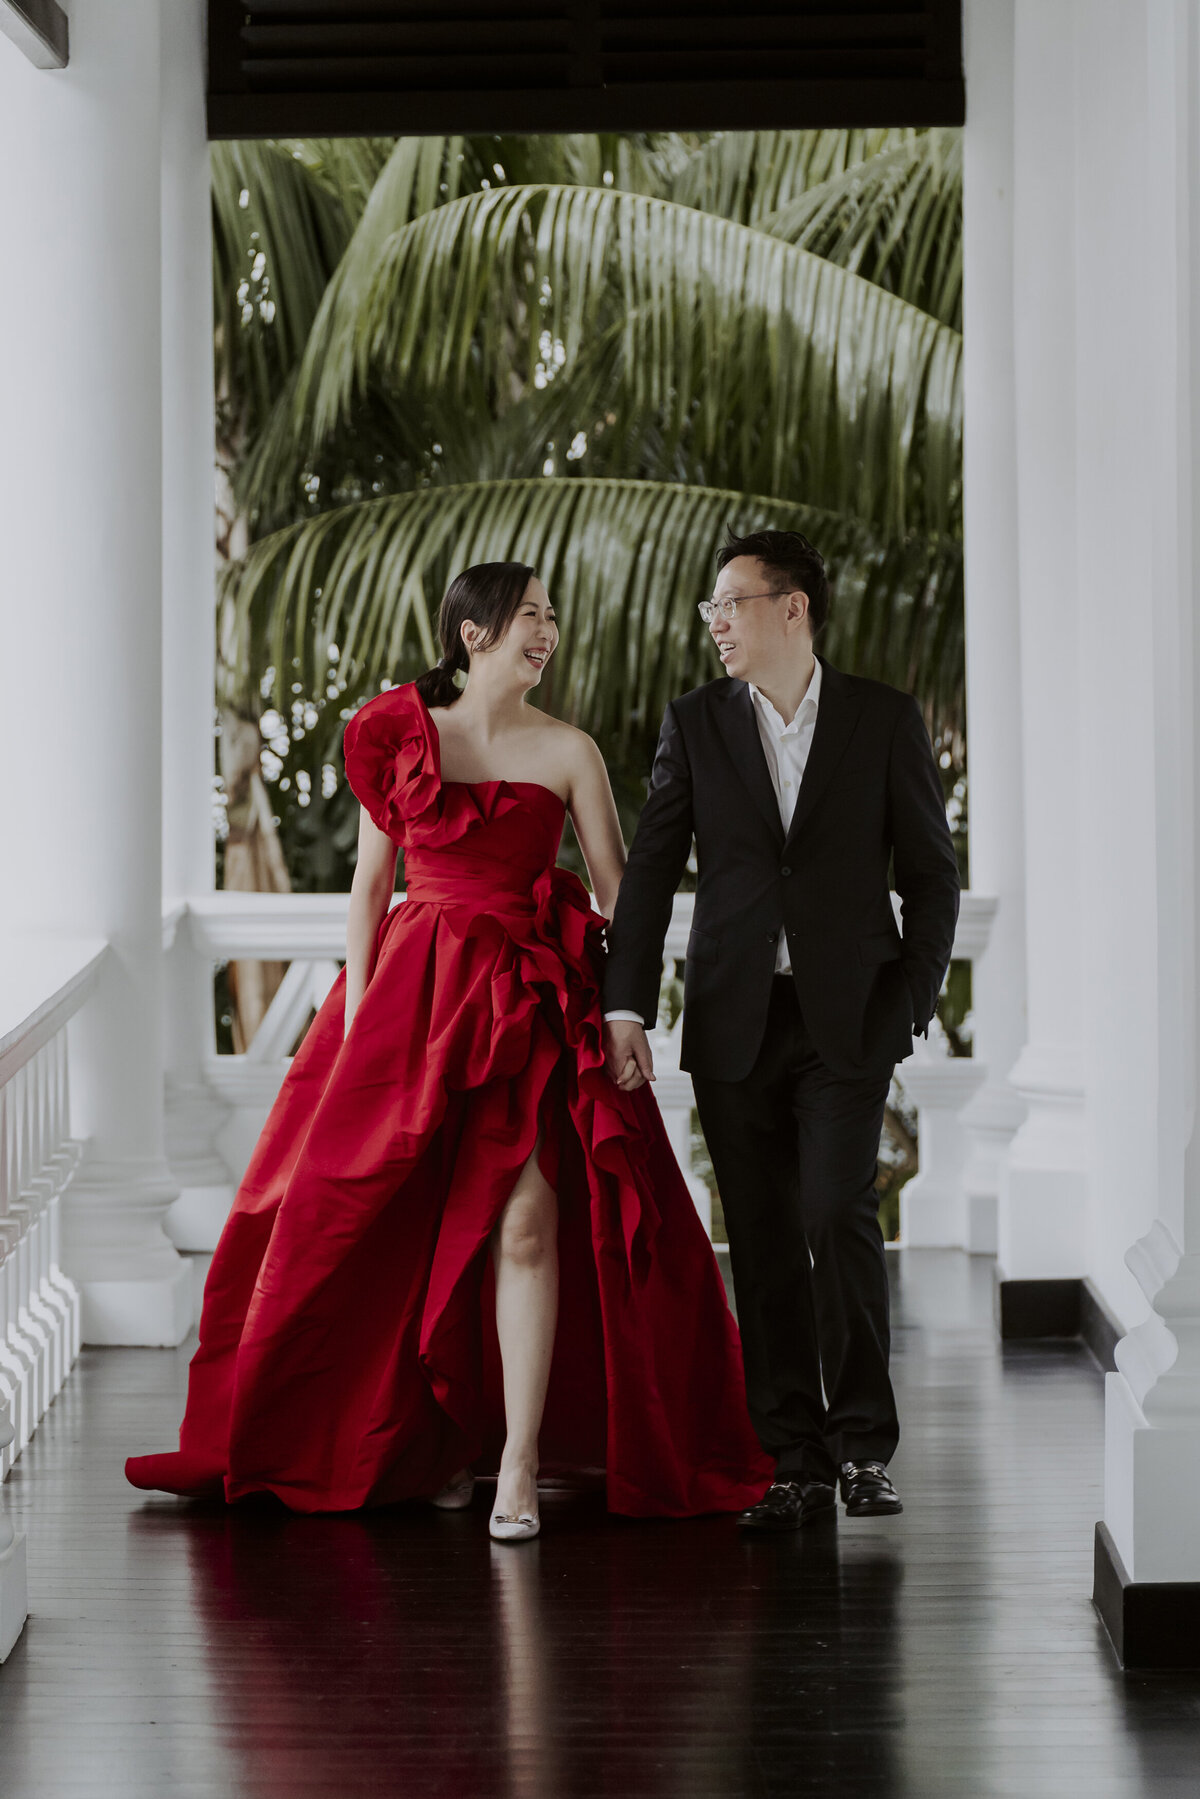 The bride in her red cheongsam dress and the groom in his black suit walking in the raffles hotel